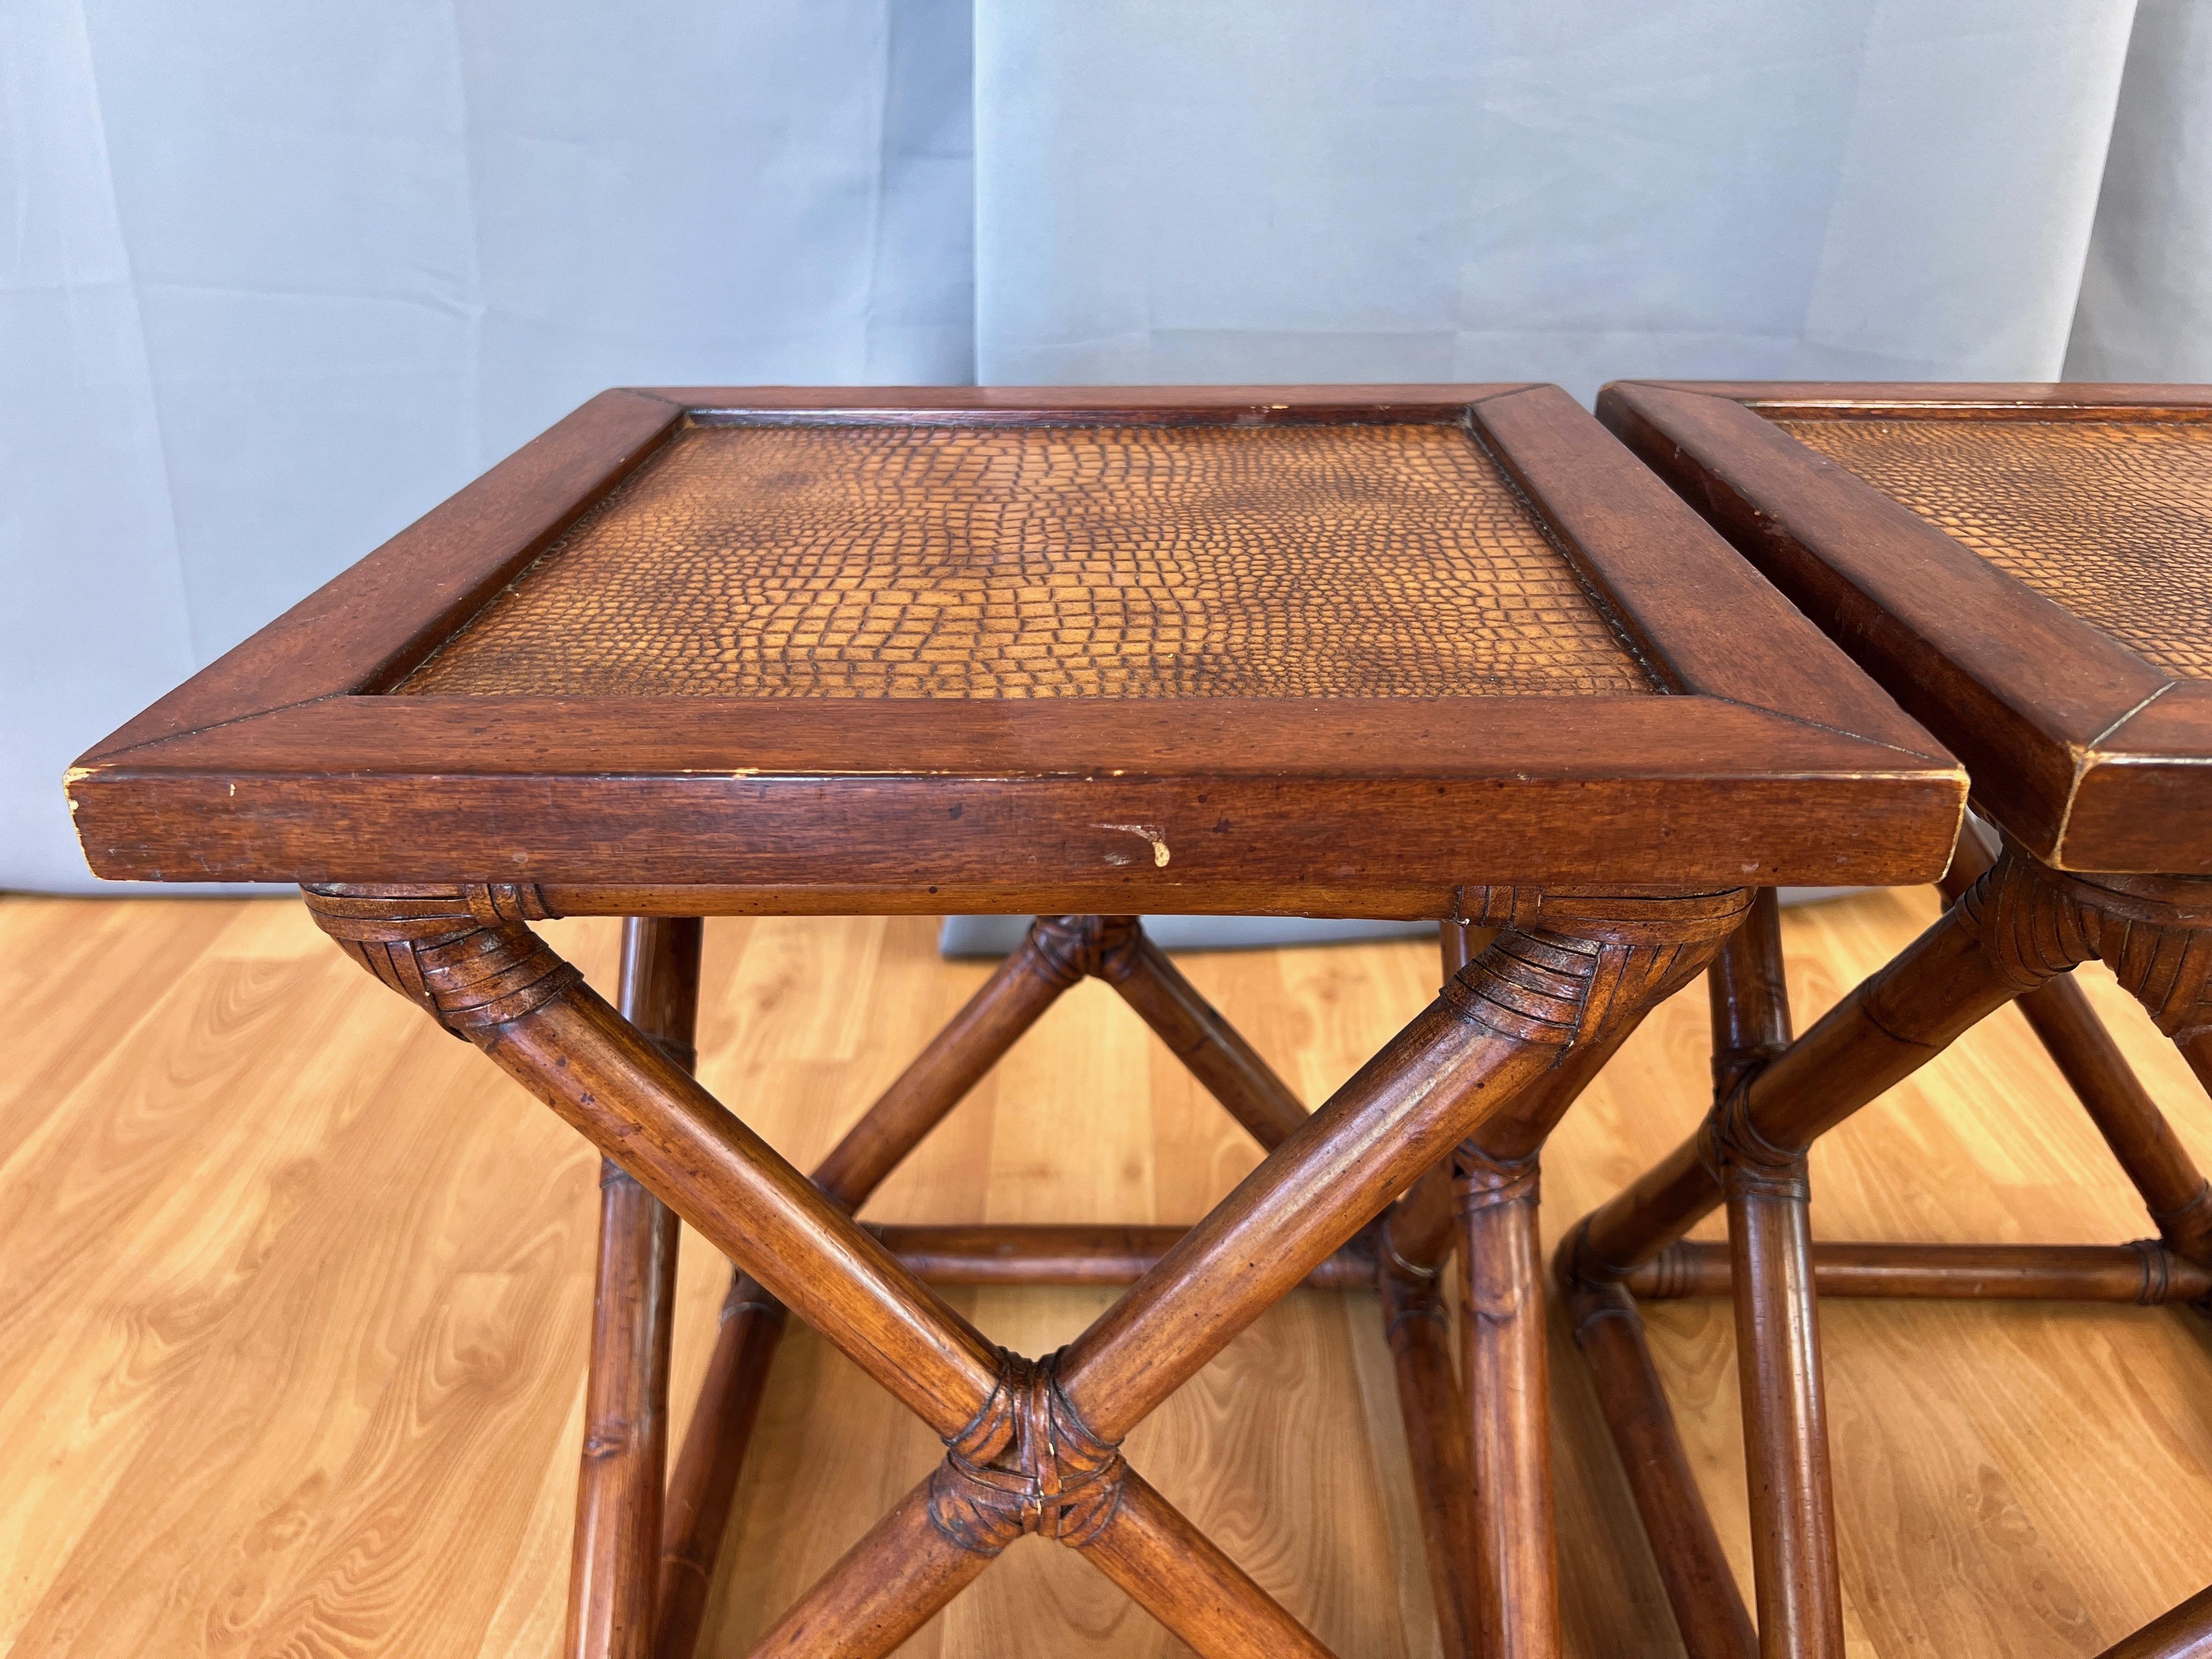 Pair of Palecek Rattan End Tables with Faux Crocodile Leather Tops, c. 2010 For Sale 9